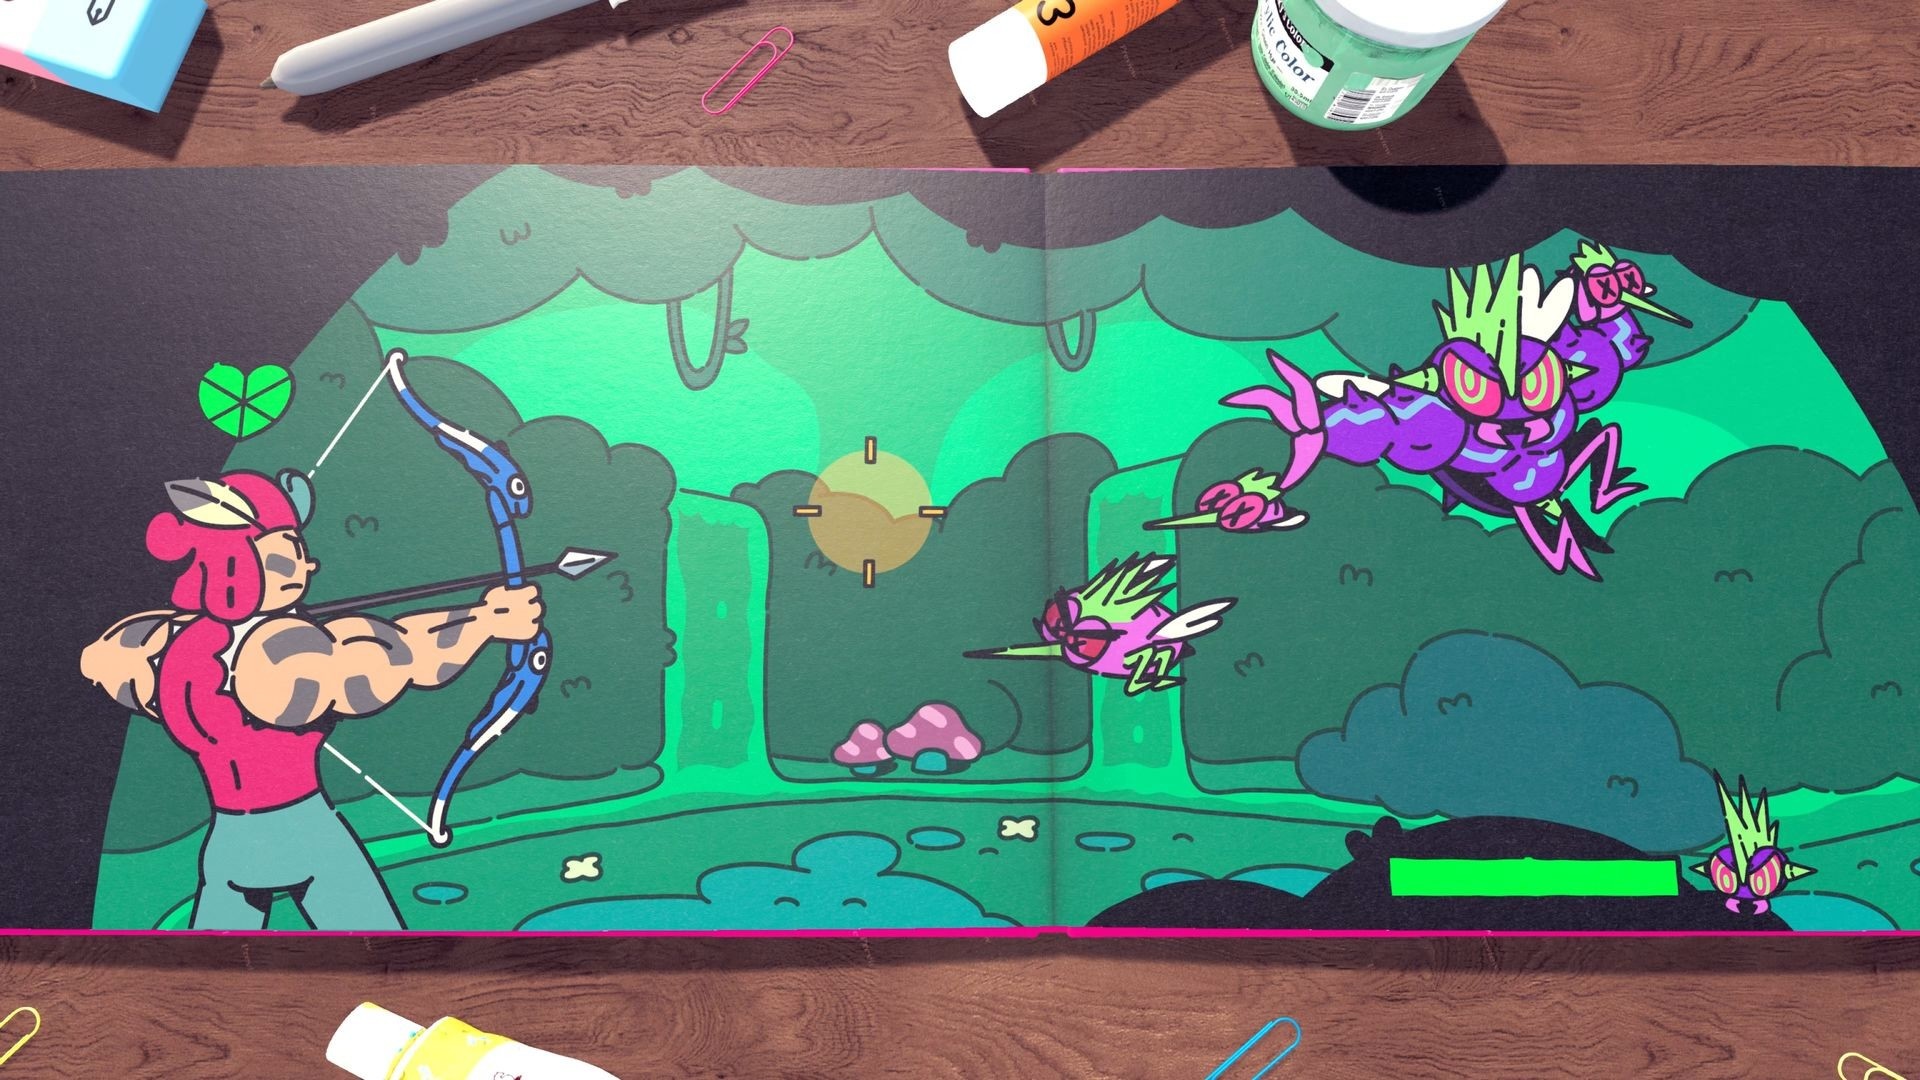 Artwork showing the main character in Plucky Squire aiming an arrow at enemies